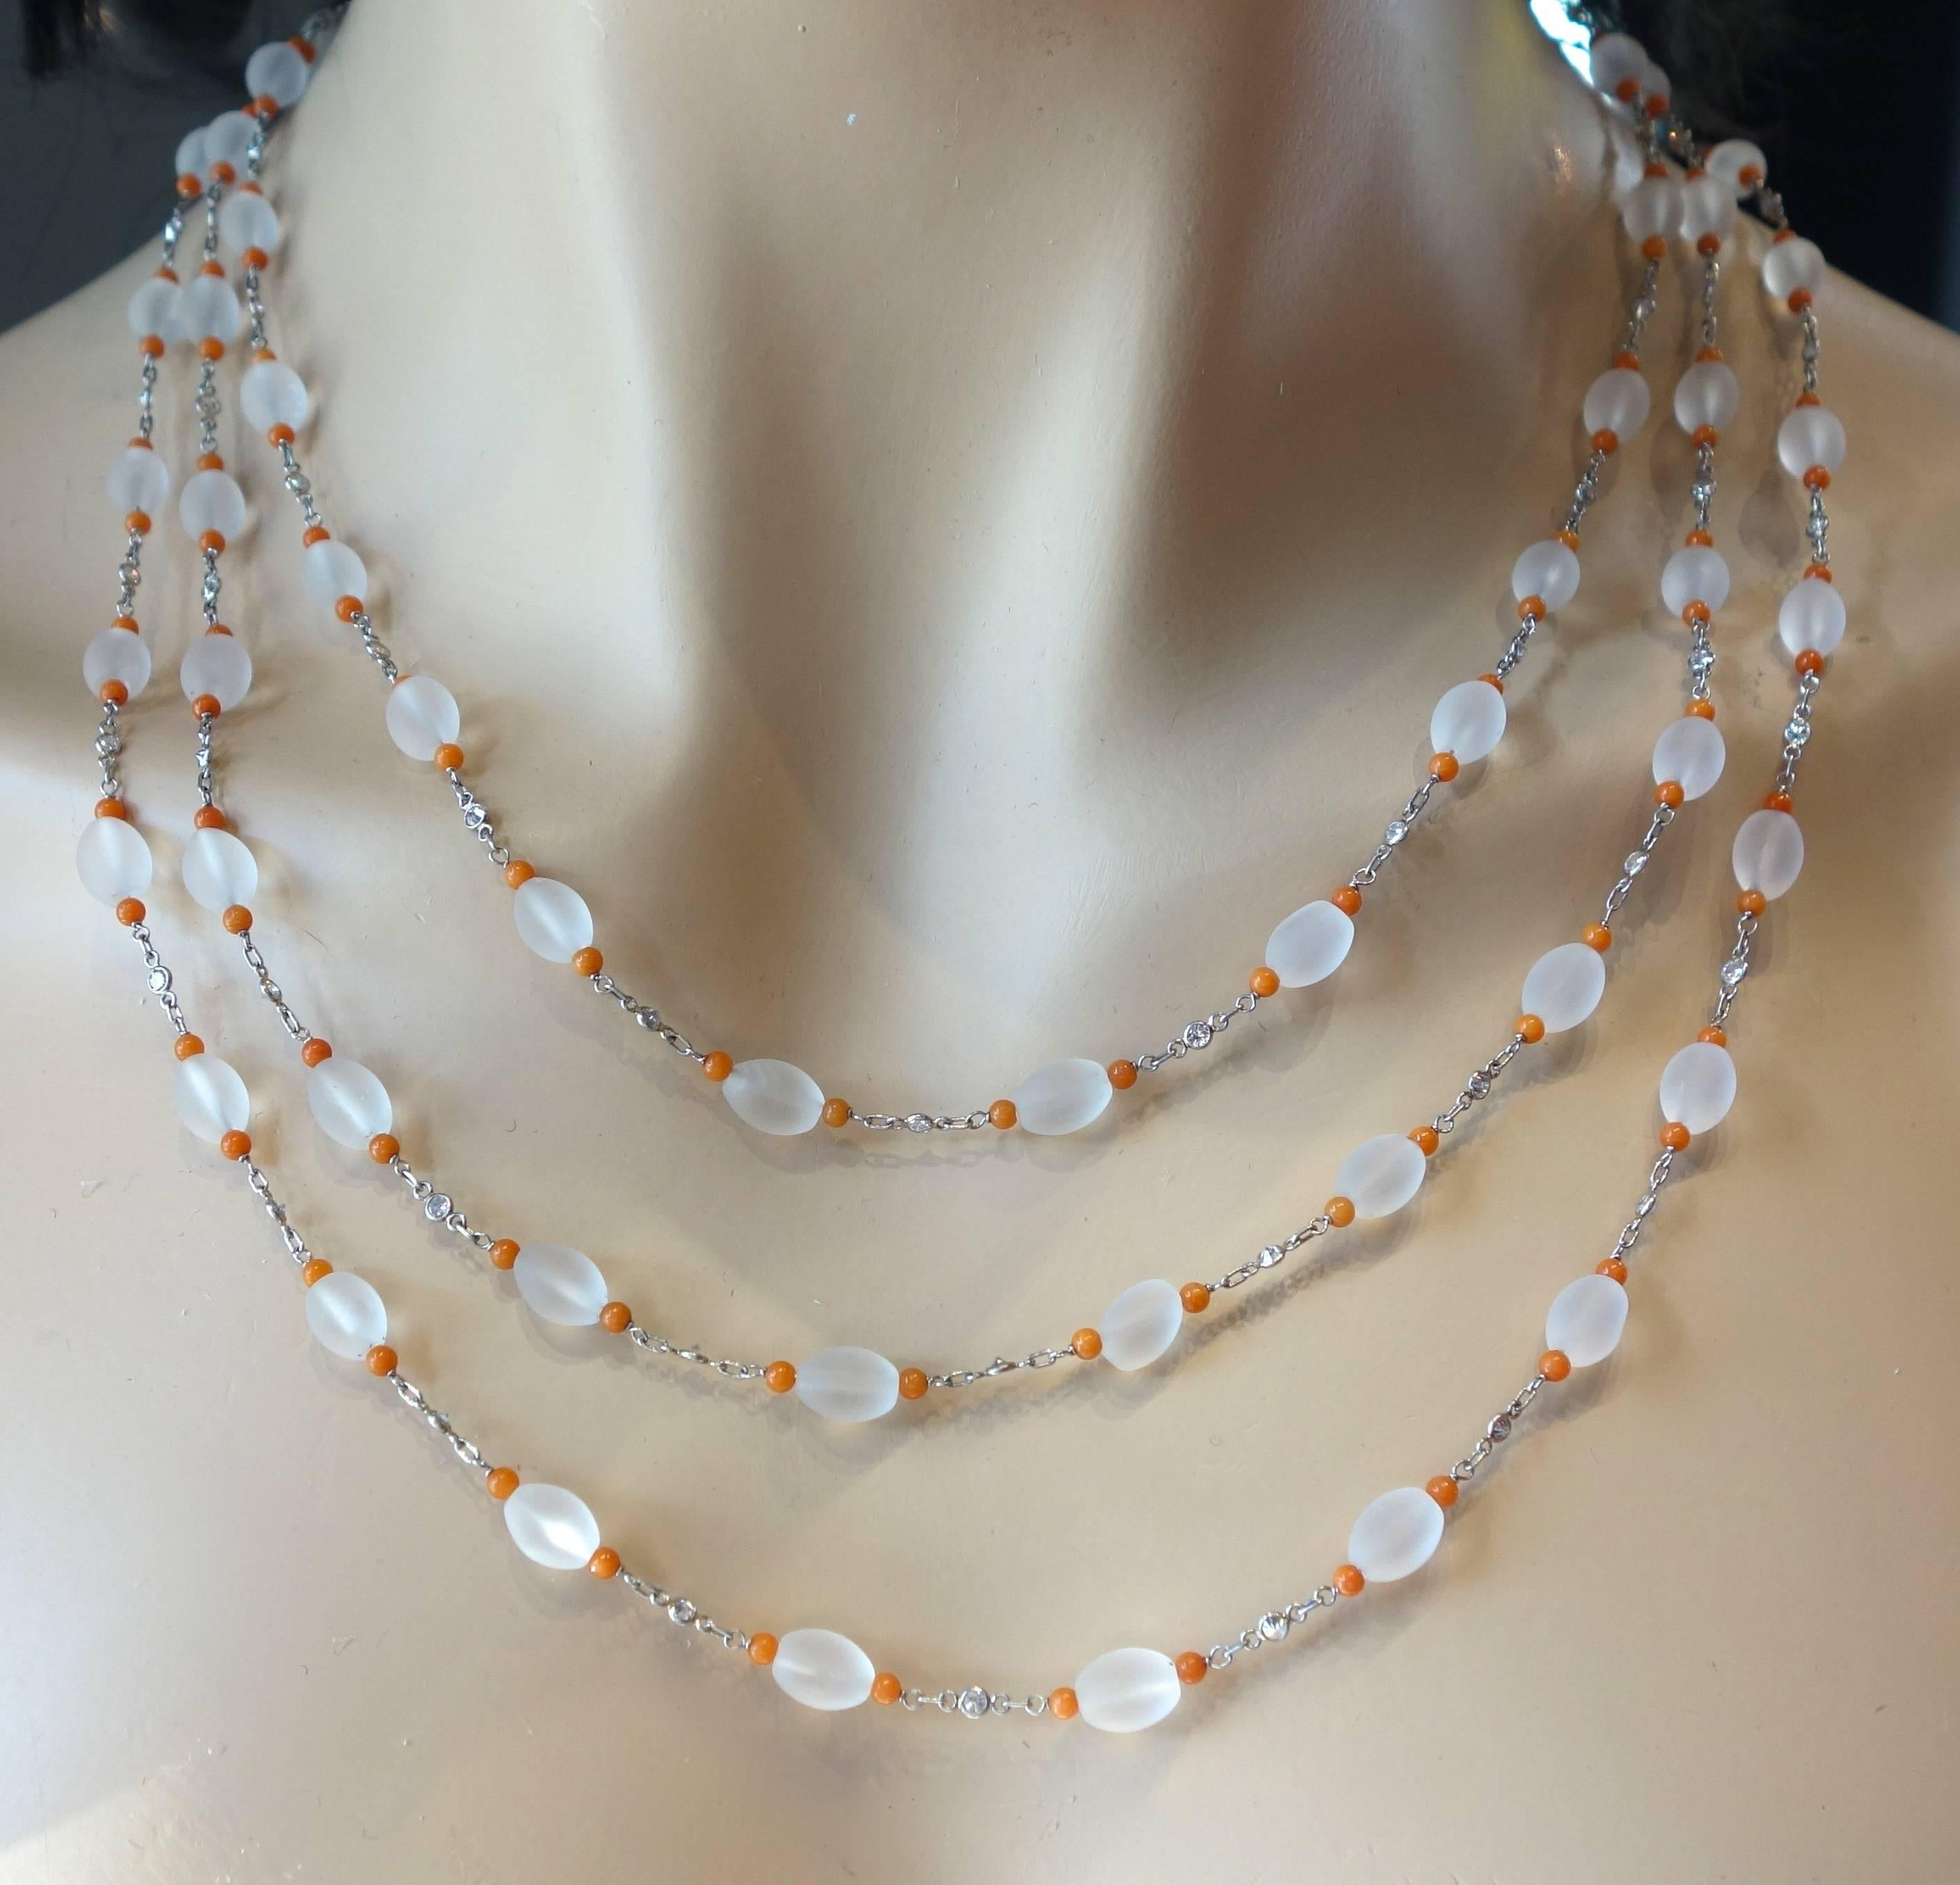 This long chain possesses frosted Rock Crystal interspersed with bright orange coral beads and diamonds.  The necklace is 67 inches long and can be worn a variety of lengths.  The diamonds are all round brilliant cut, near colorless and slightly